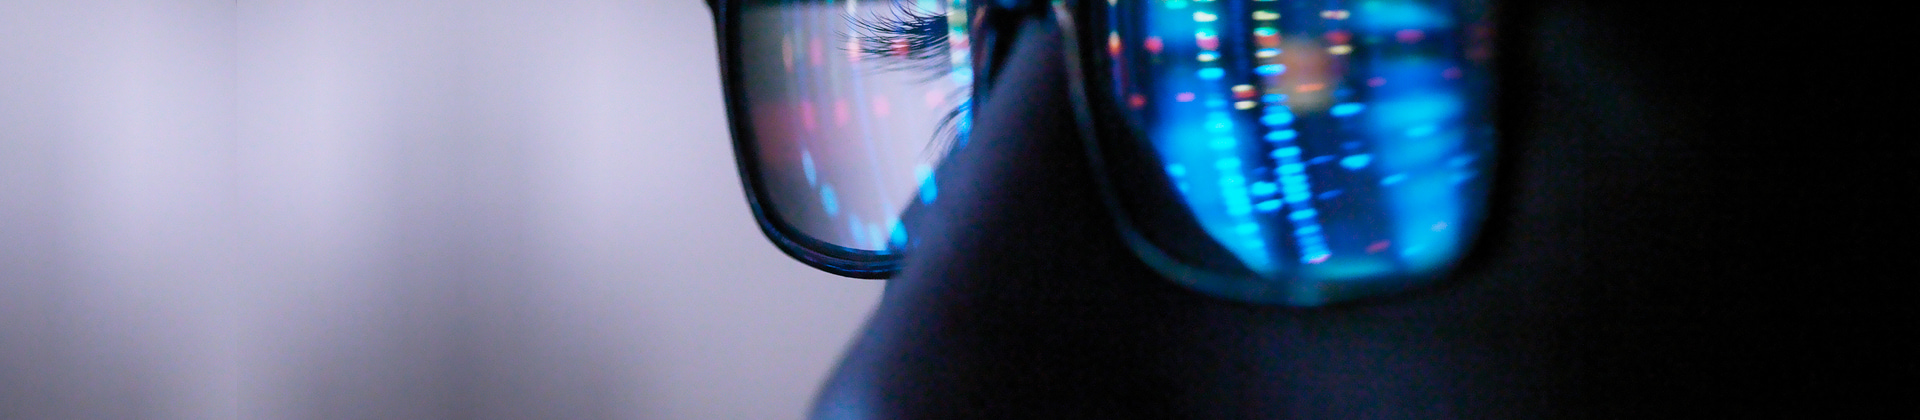 reflection of computer on persons eyeglasses 